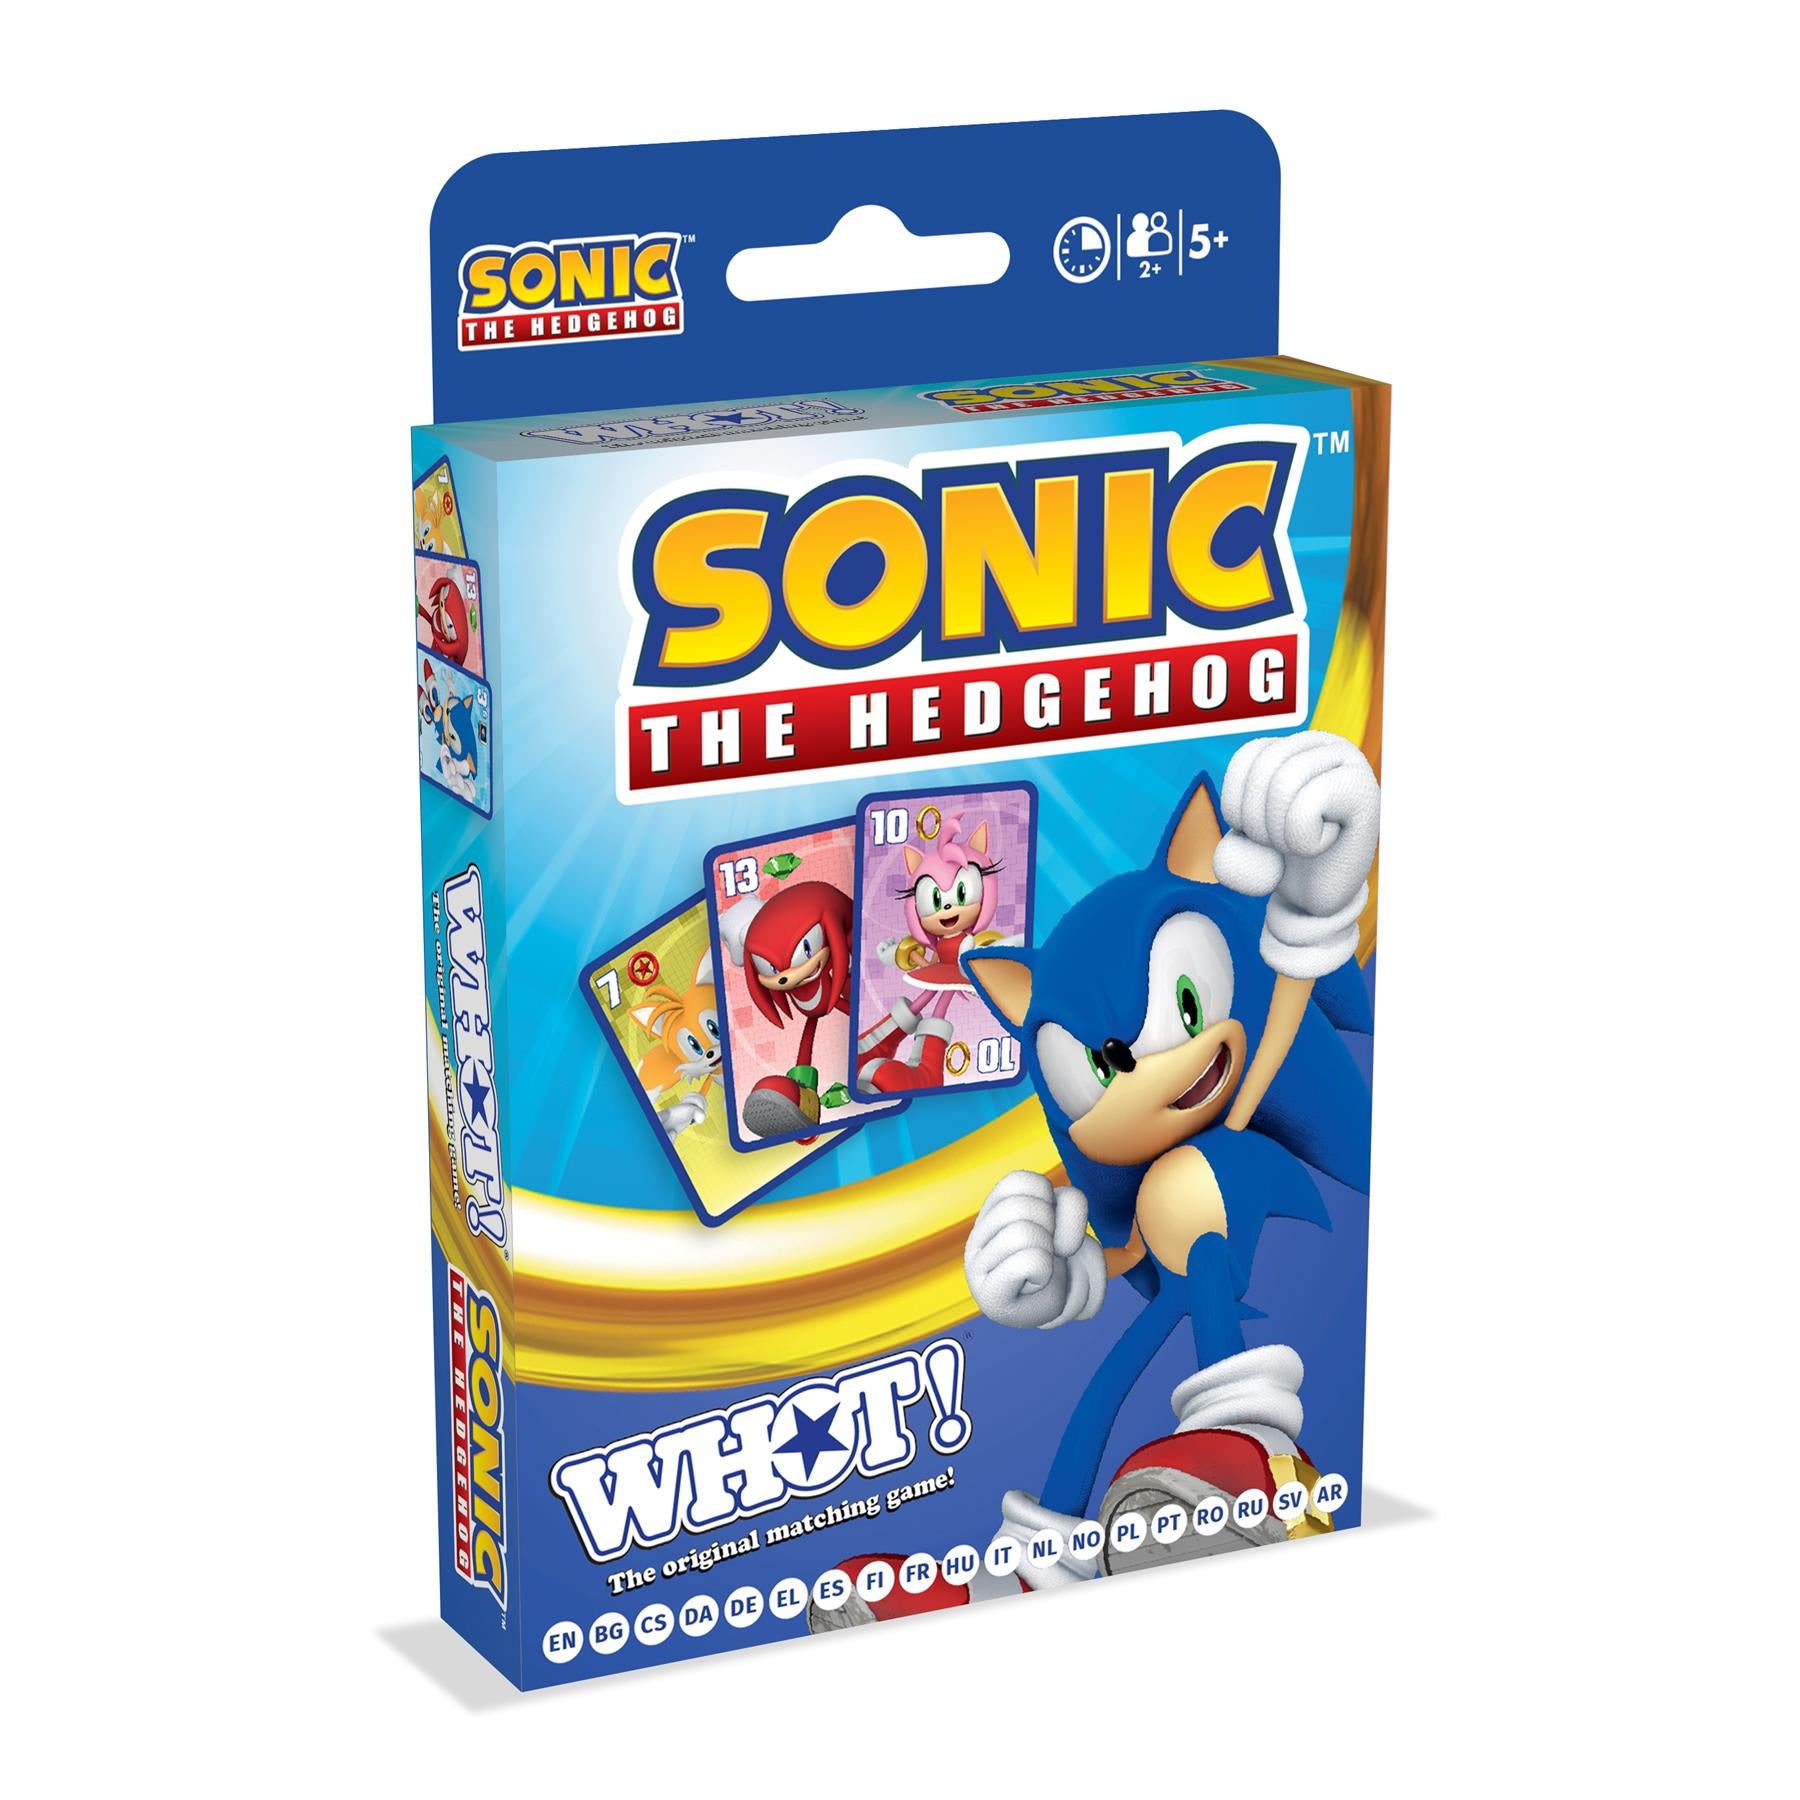 Sonic the Hedgehog WHOT! Card Game